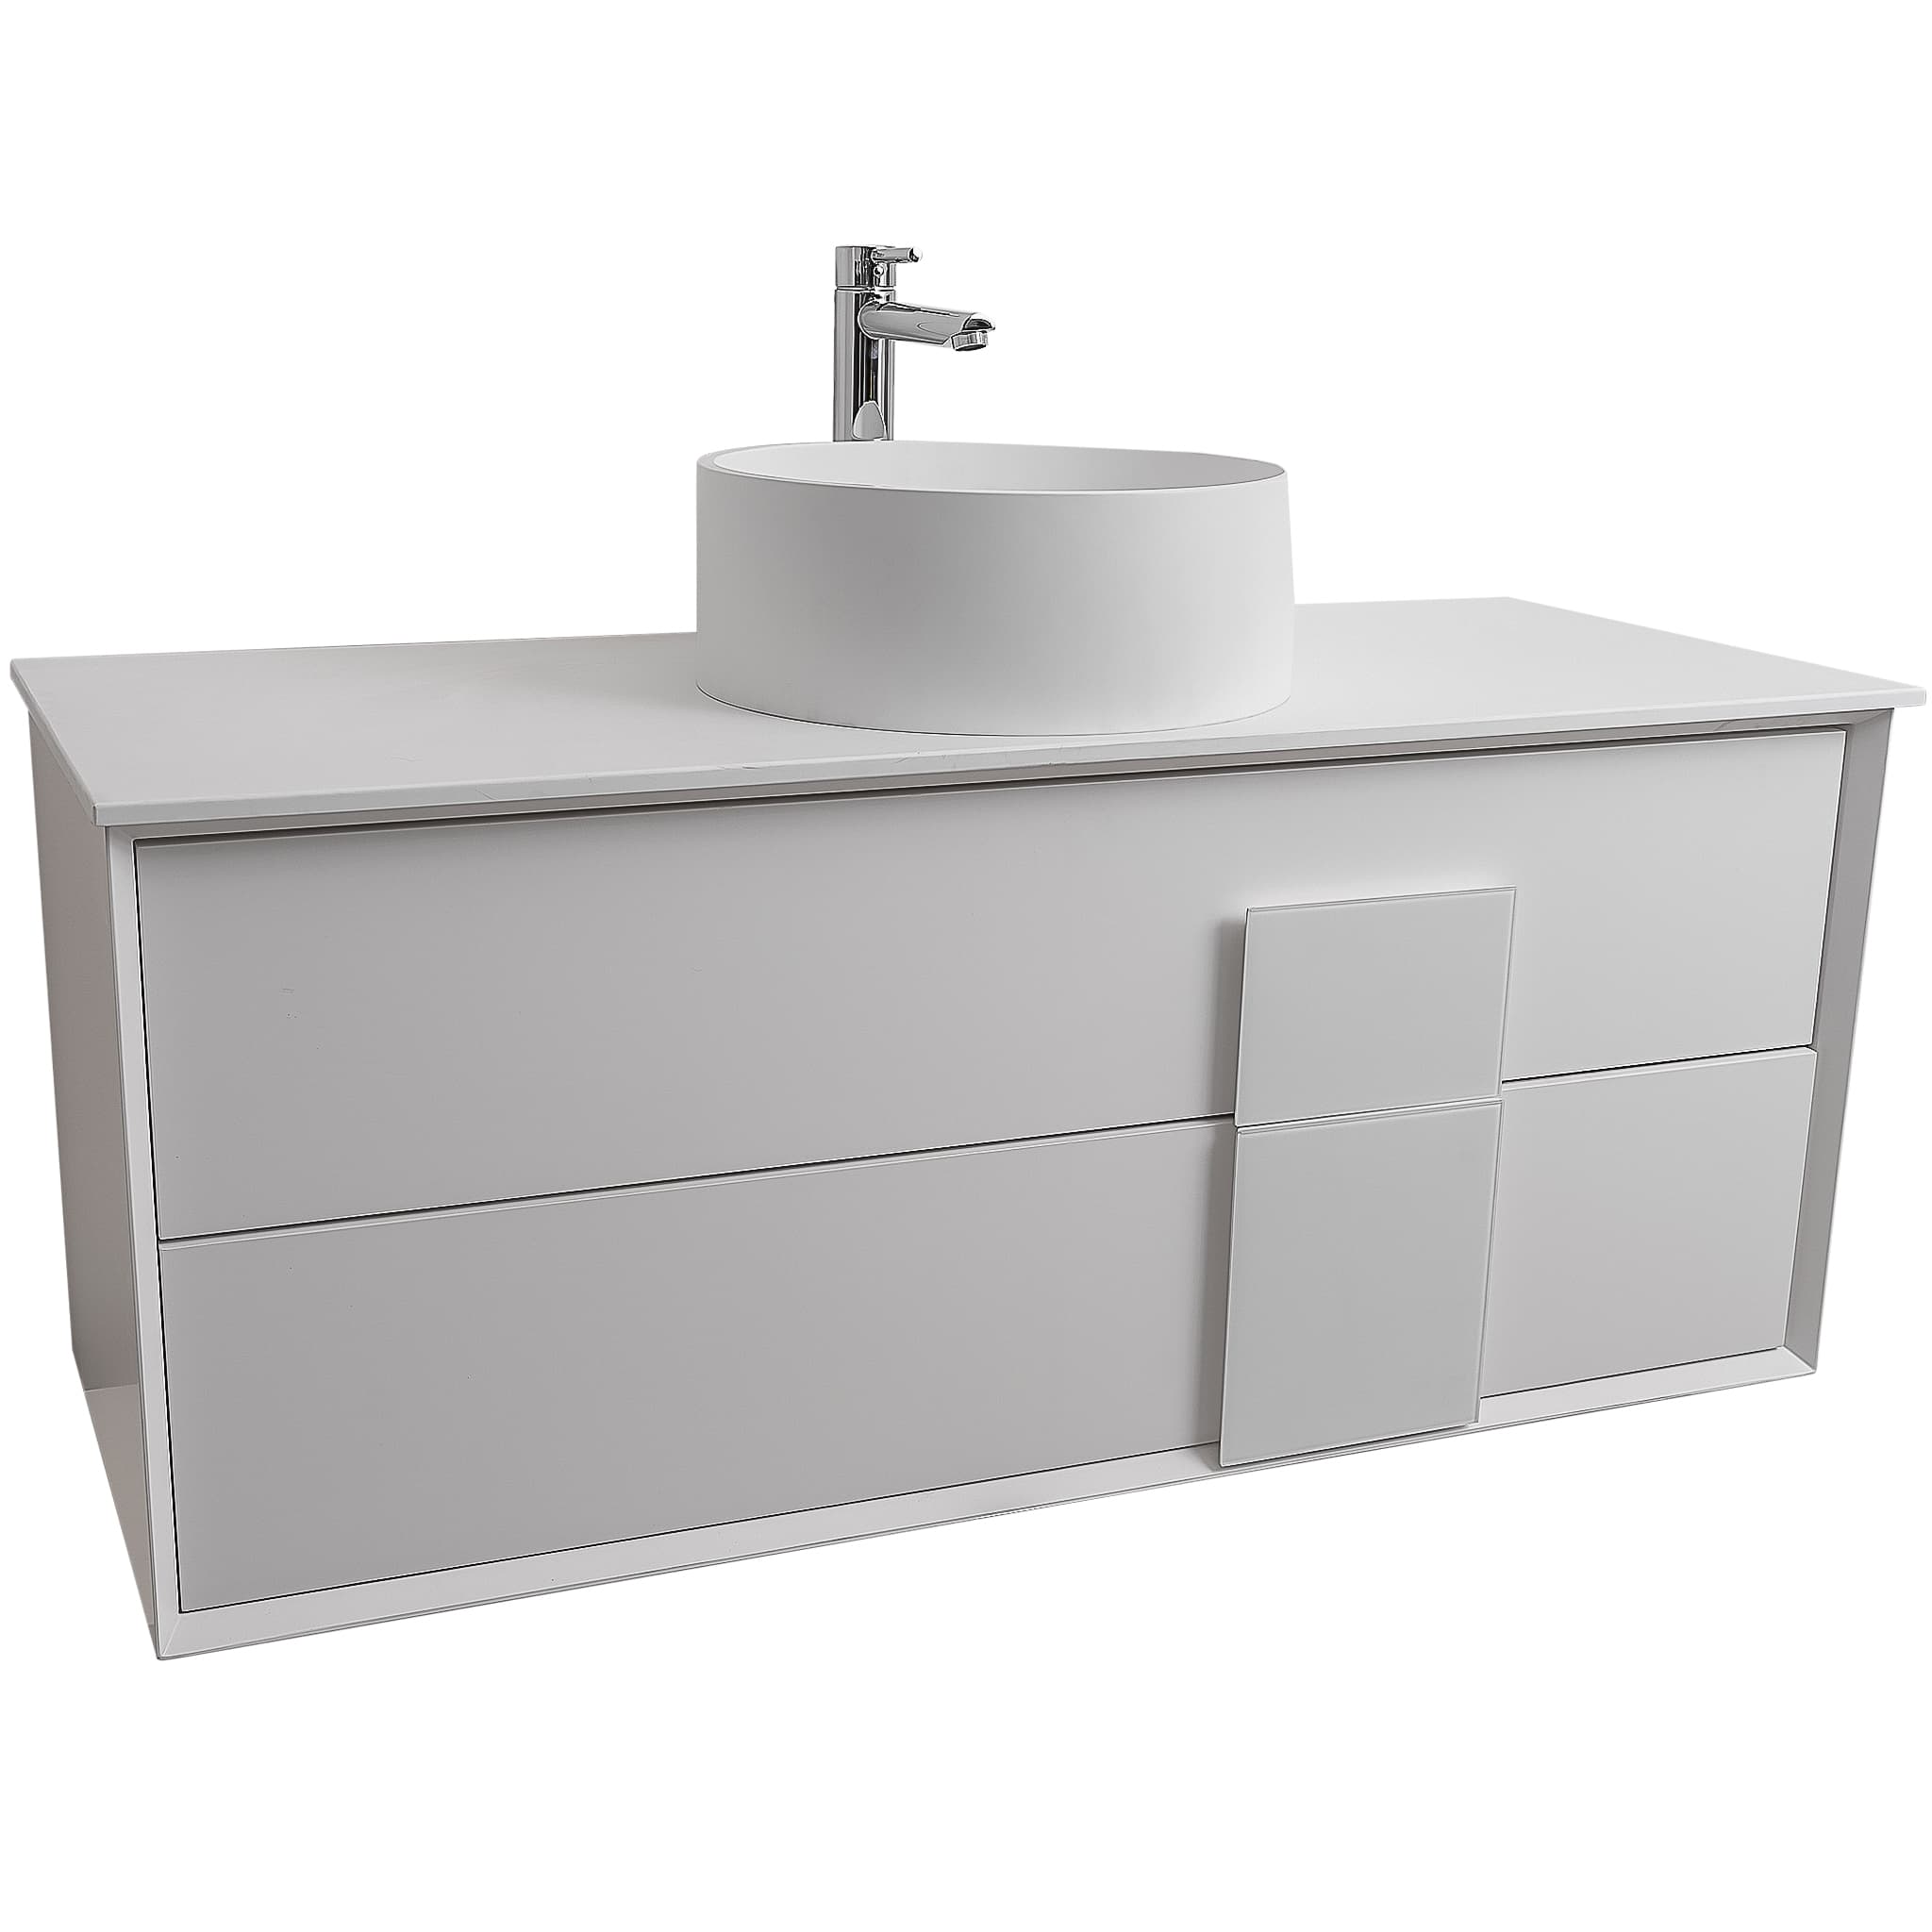 Piazza 47.5 Matte White With White Handle Cabinet, Solid Surface Flat White Counter and Round Solid Surface White Basin 1386, Wall Mounted Modern Vanity Set